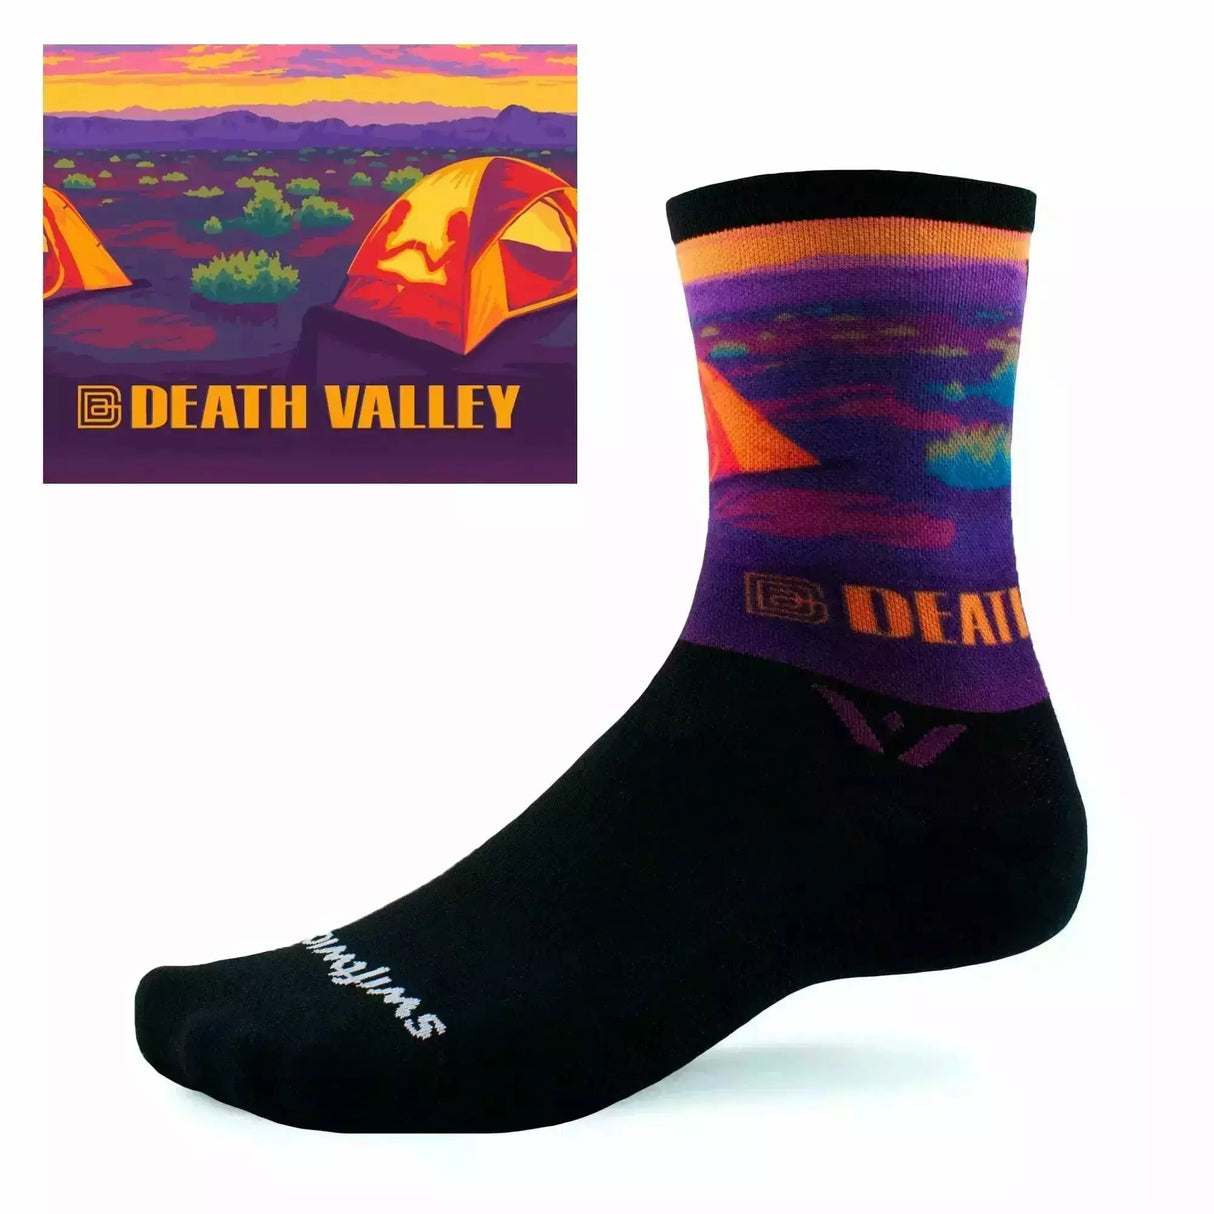 Swiftwick Vision Six Impression National Parks Collection Crew Socks  -  Small / Death Valley